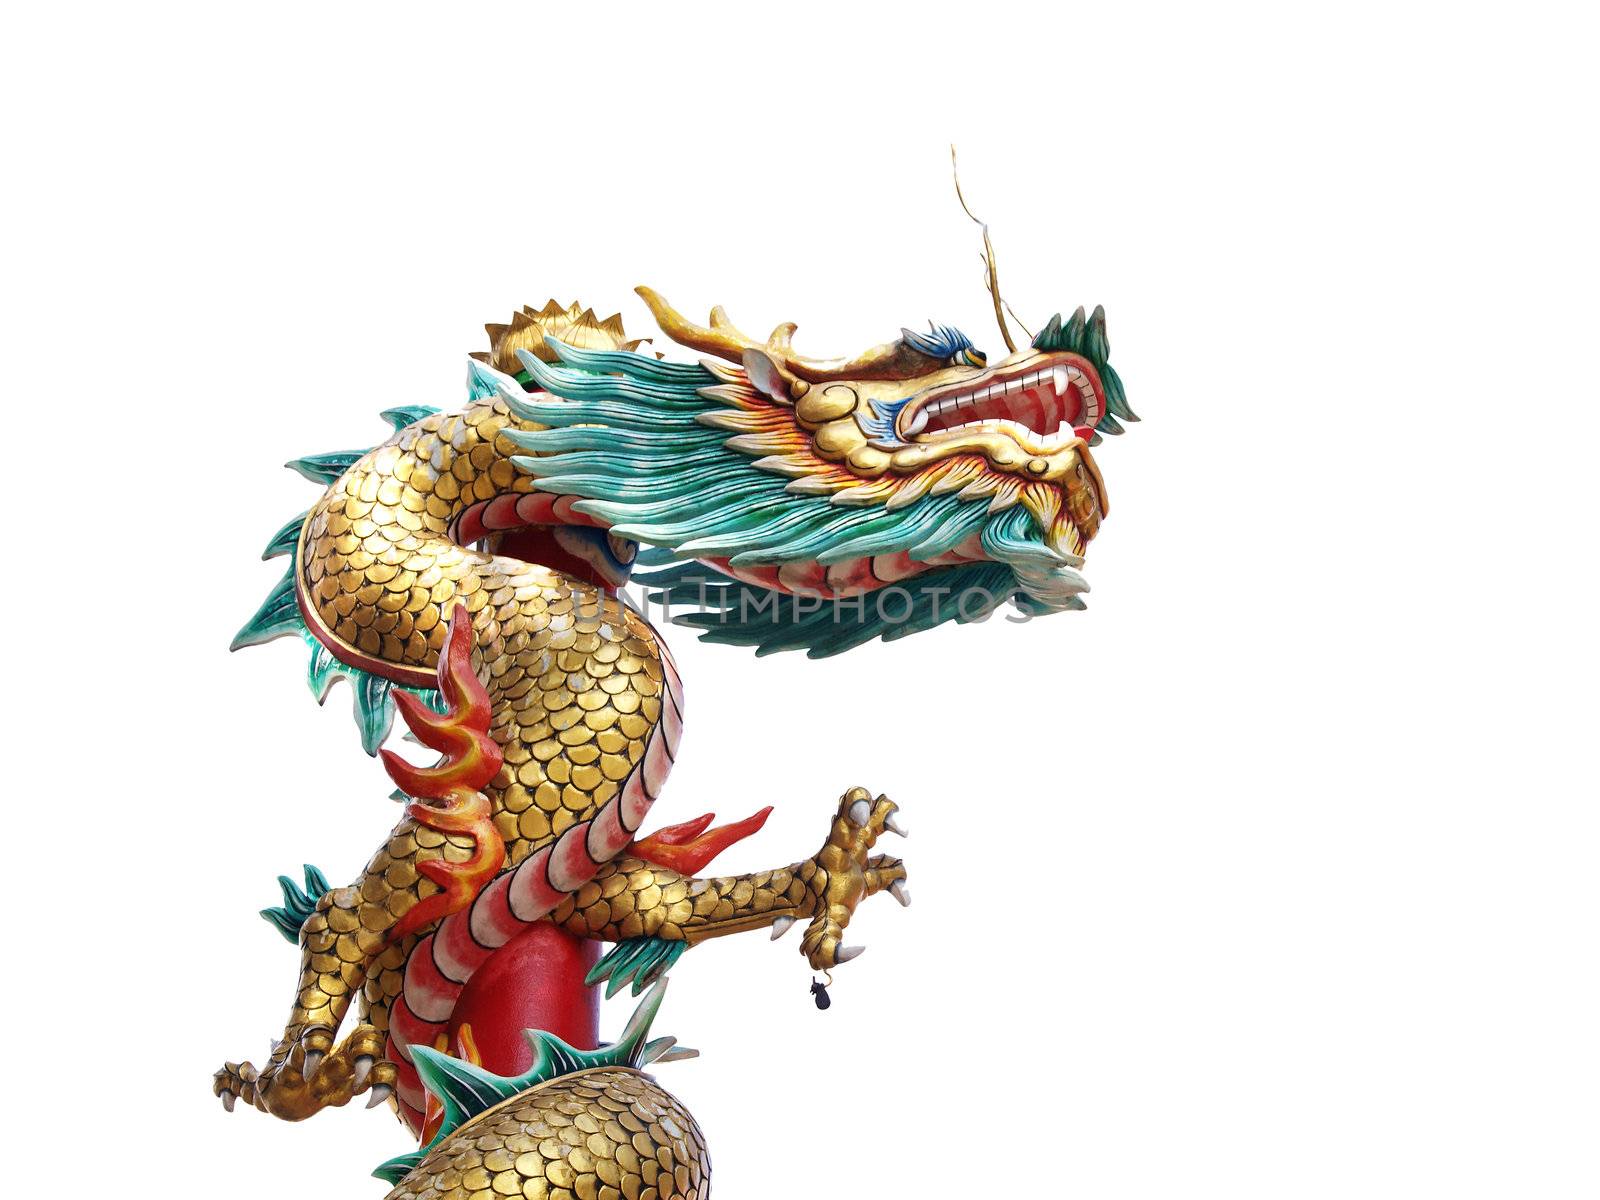 Chinese style dragon statue isolate on white background (from temple in Thailand)